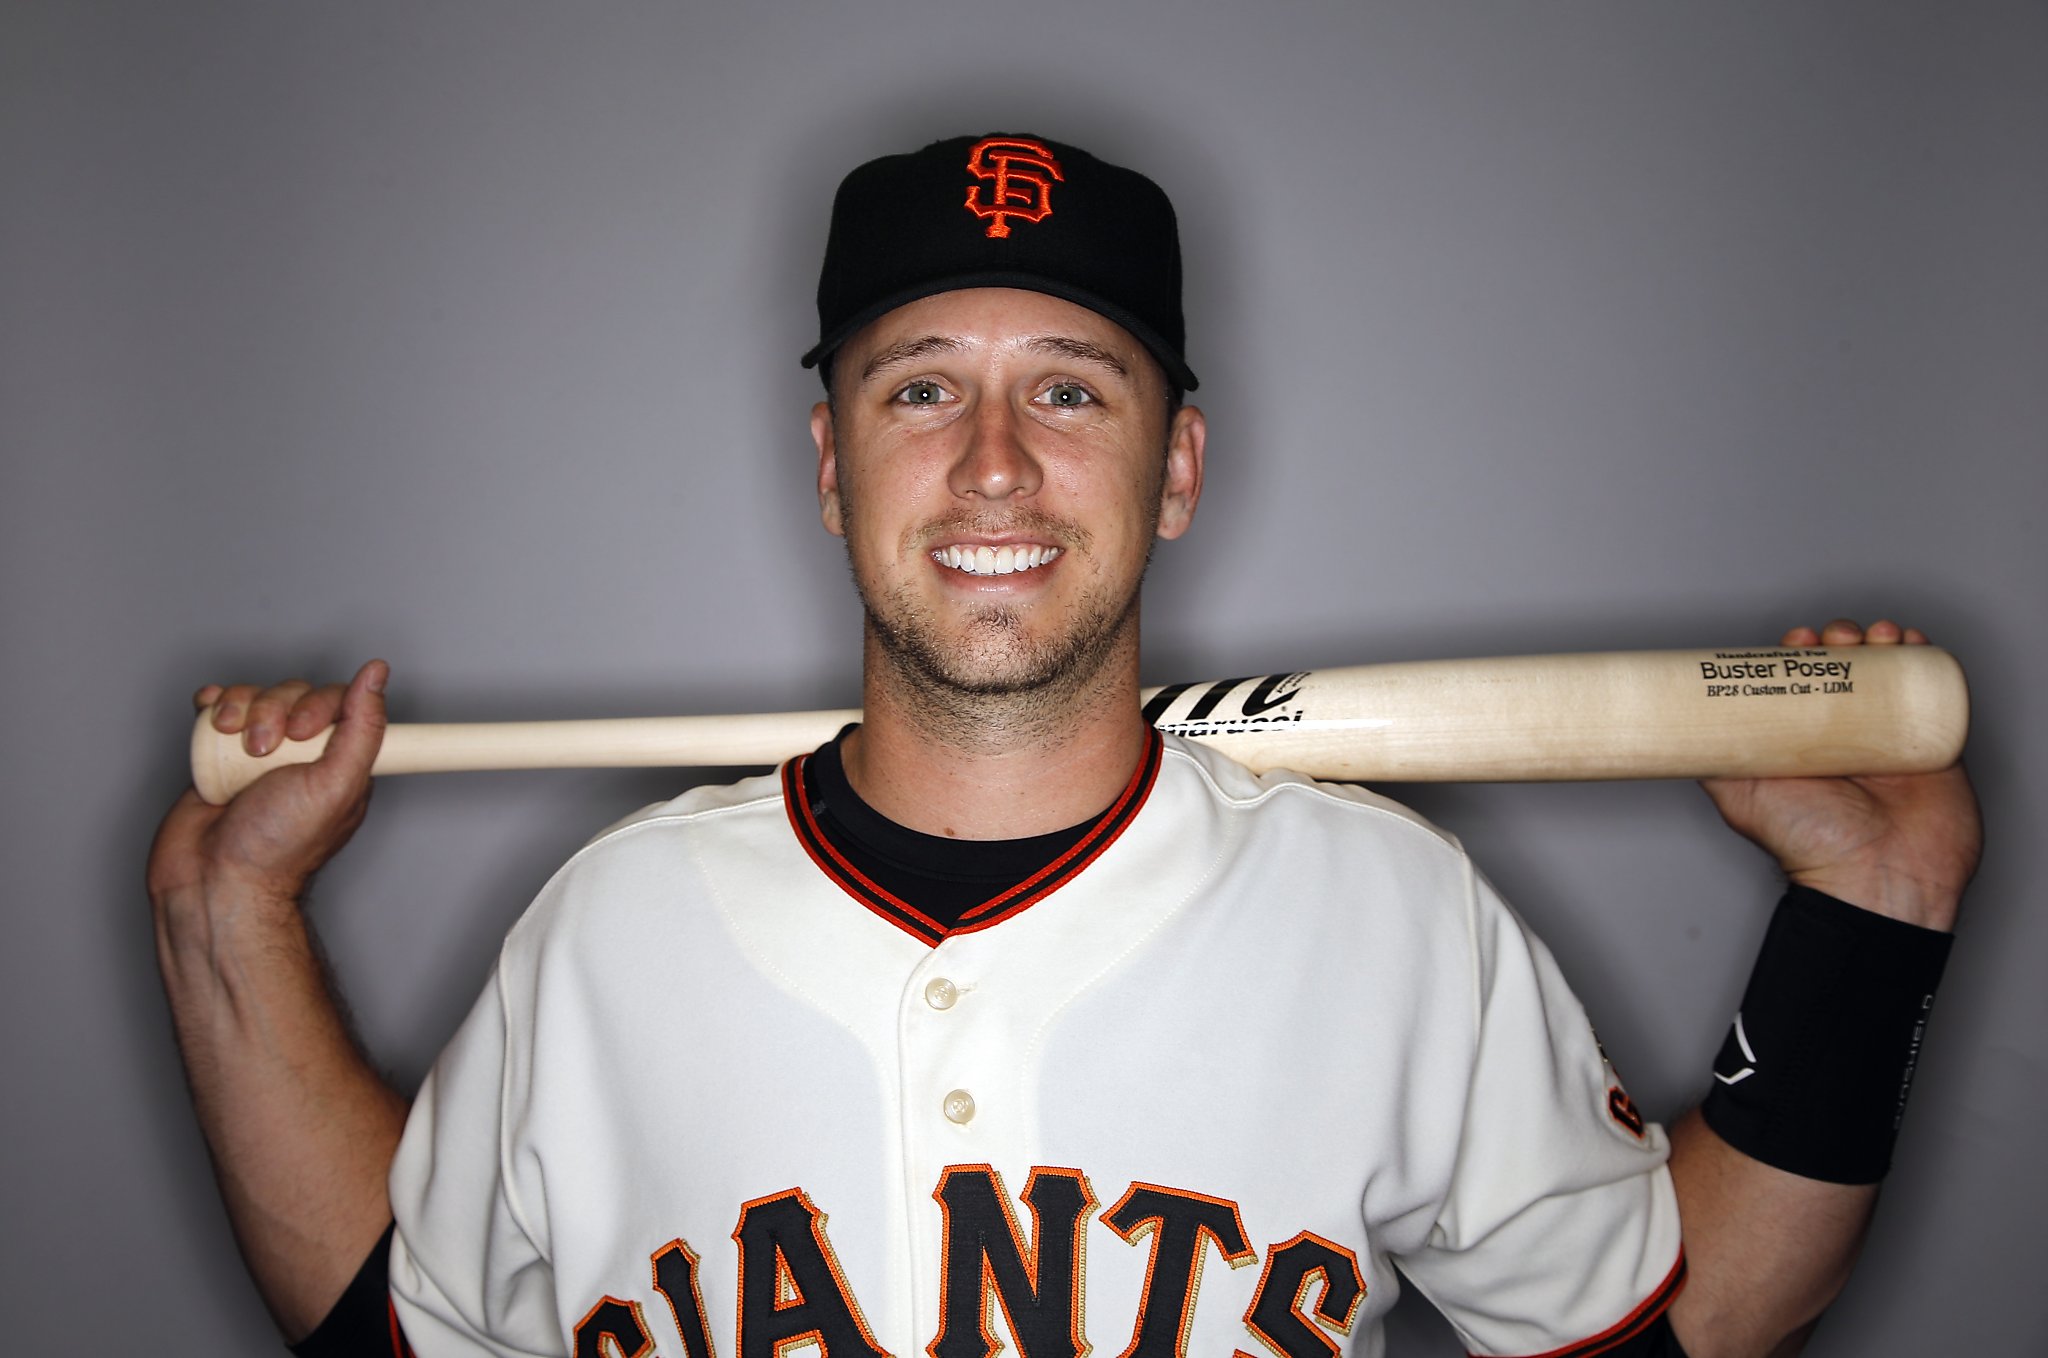 Buster Posey's San Francisco Giants career in photos